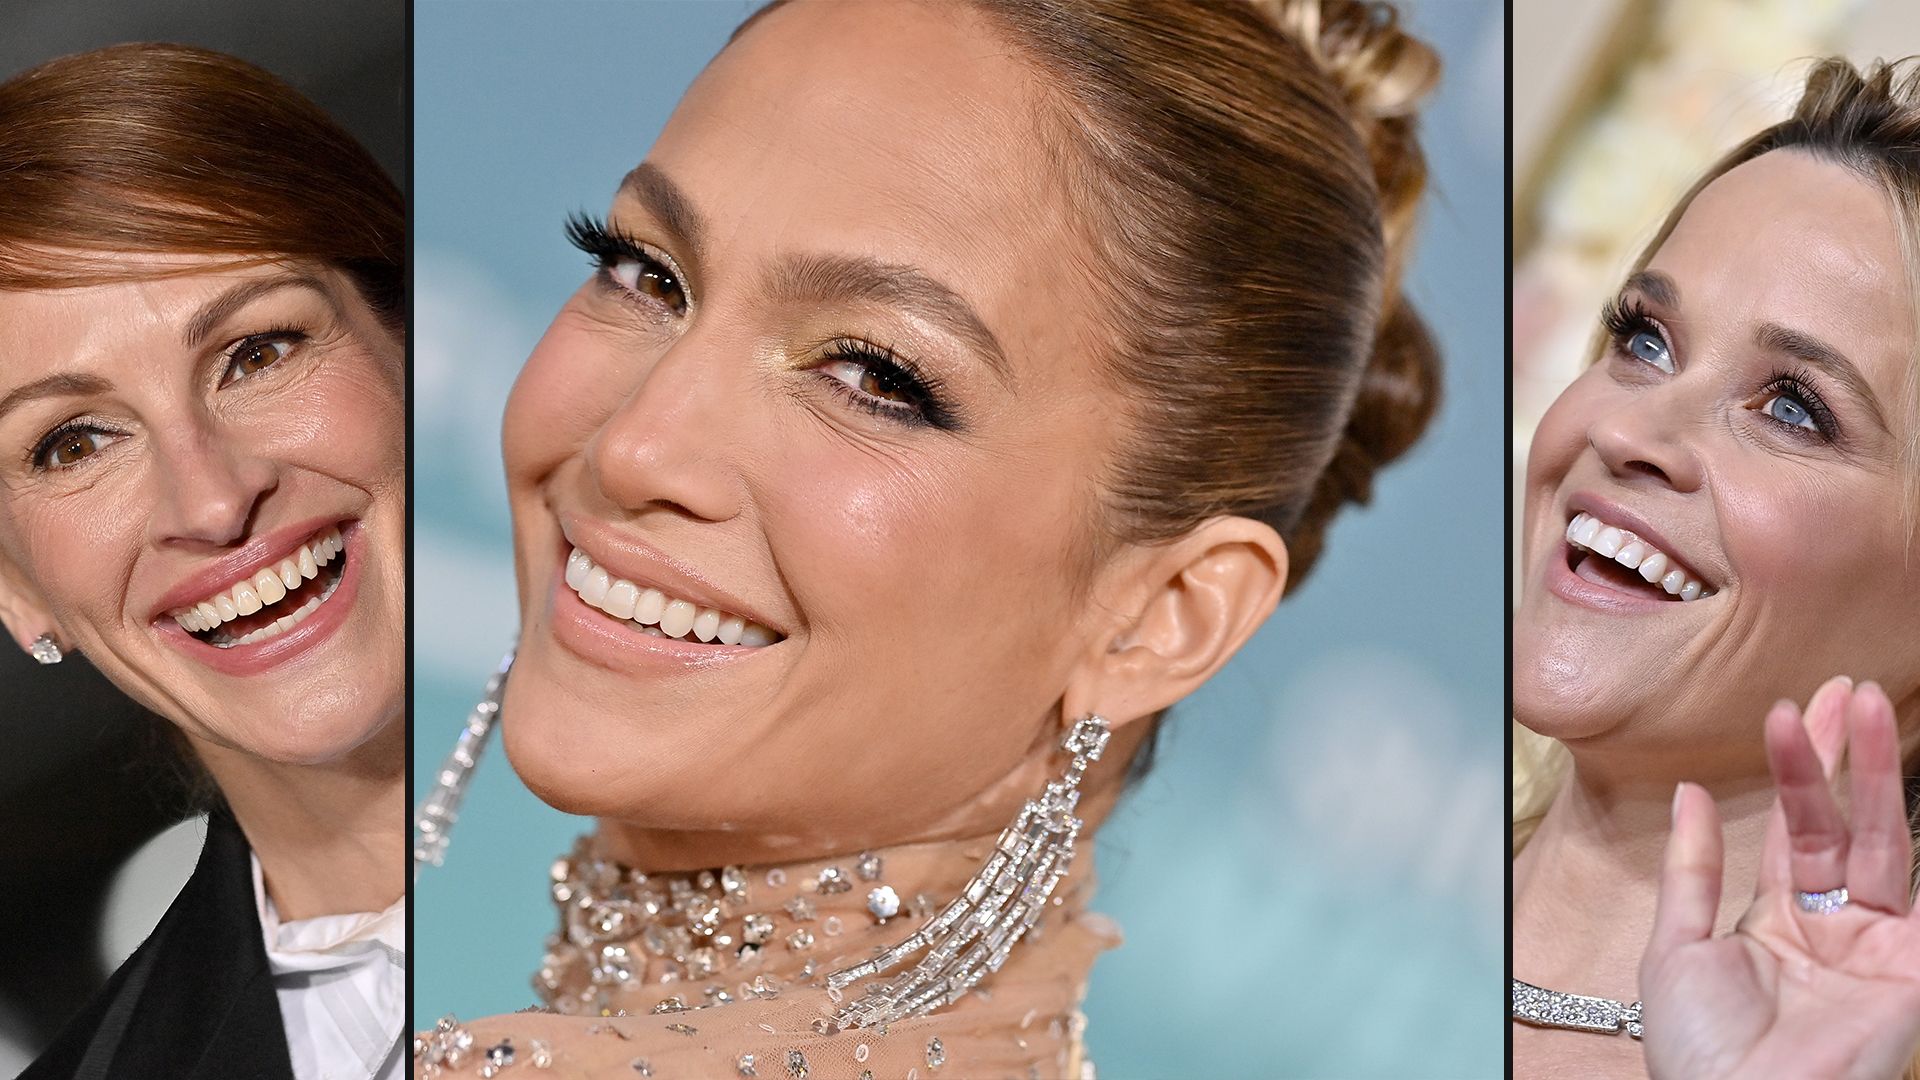 Julia Roberts, JLo and Reese Witherspoon all have beautiful smiles